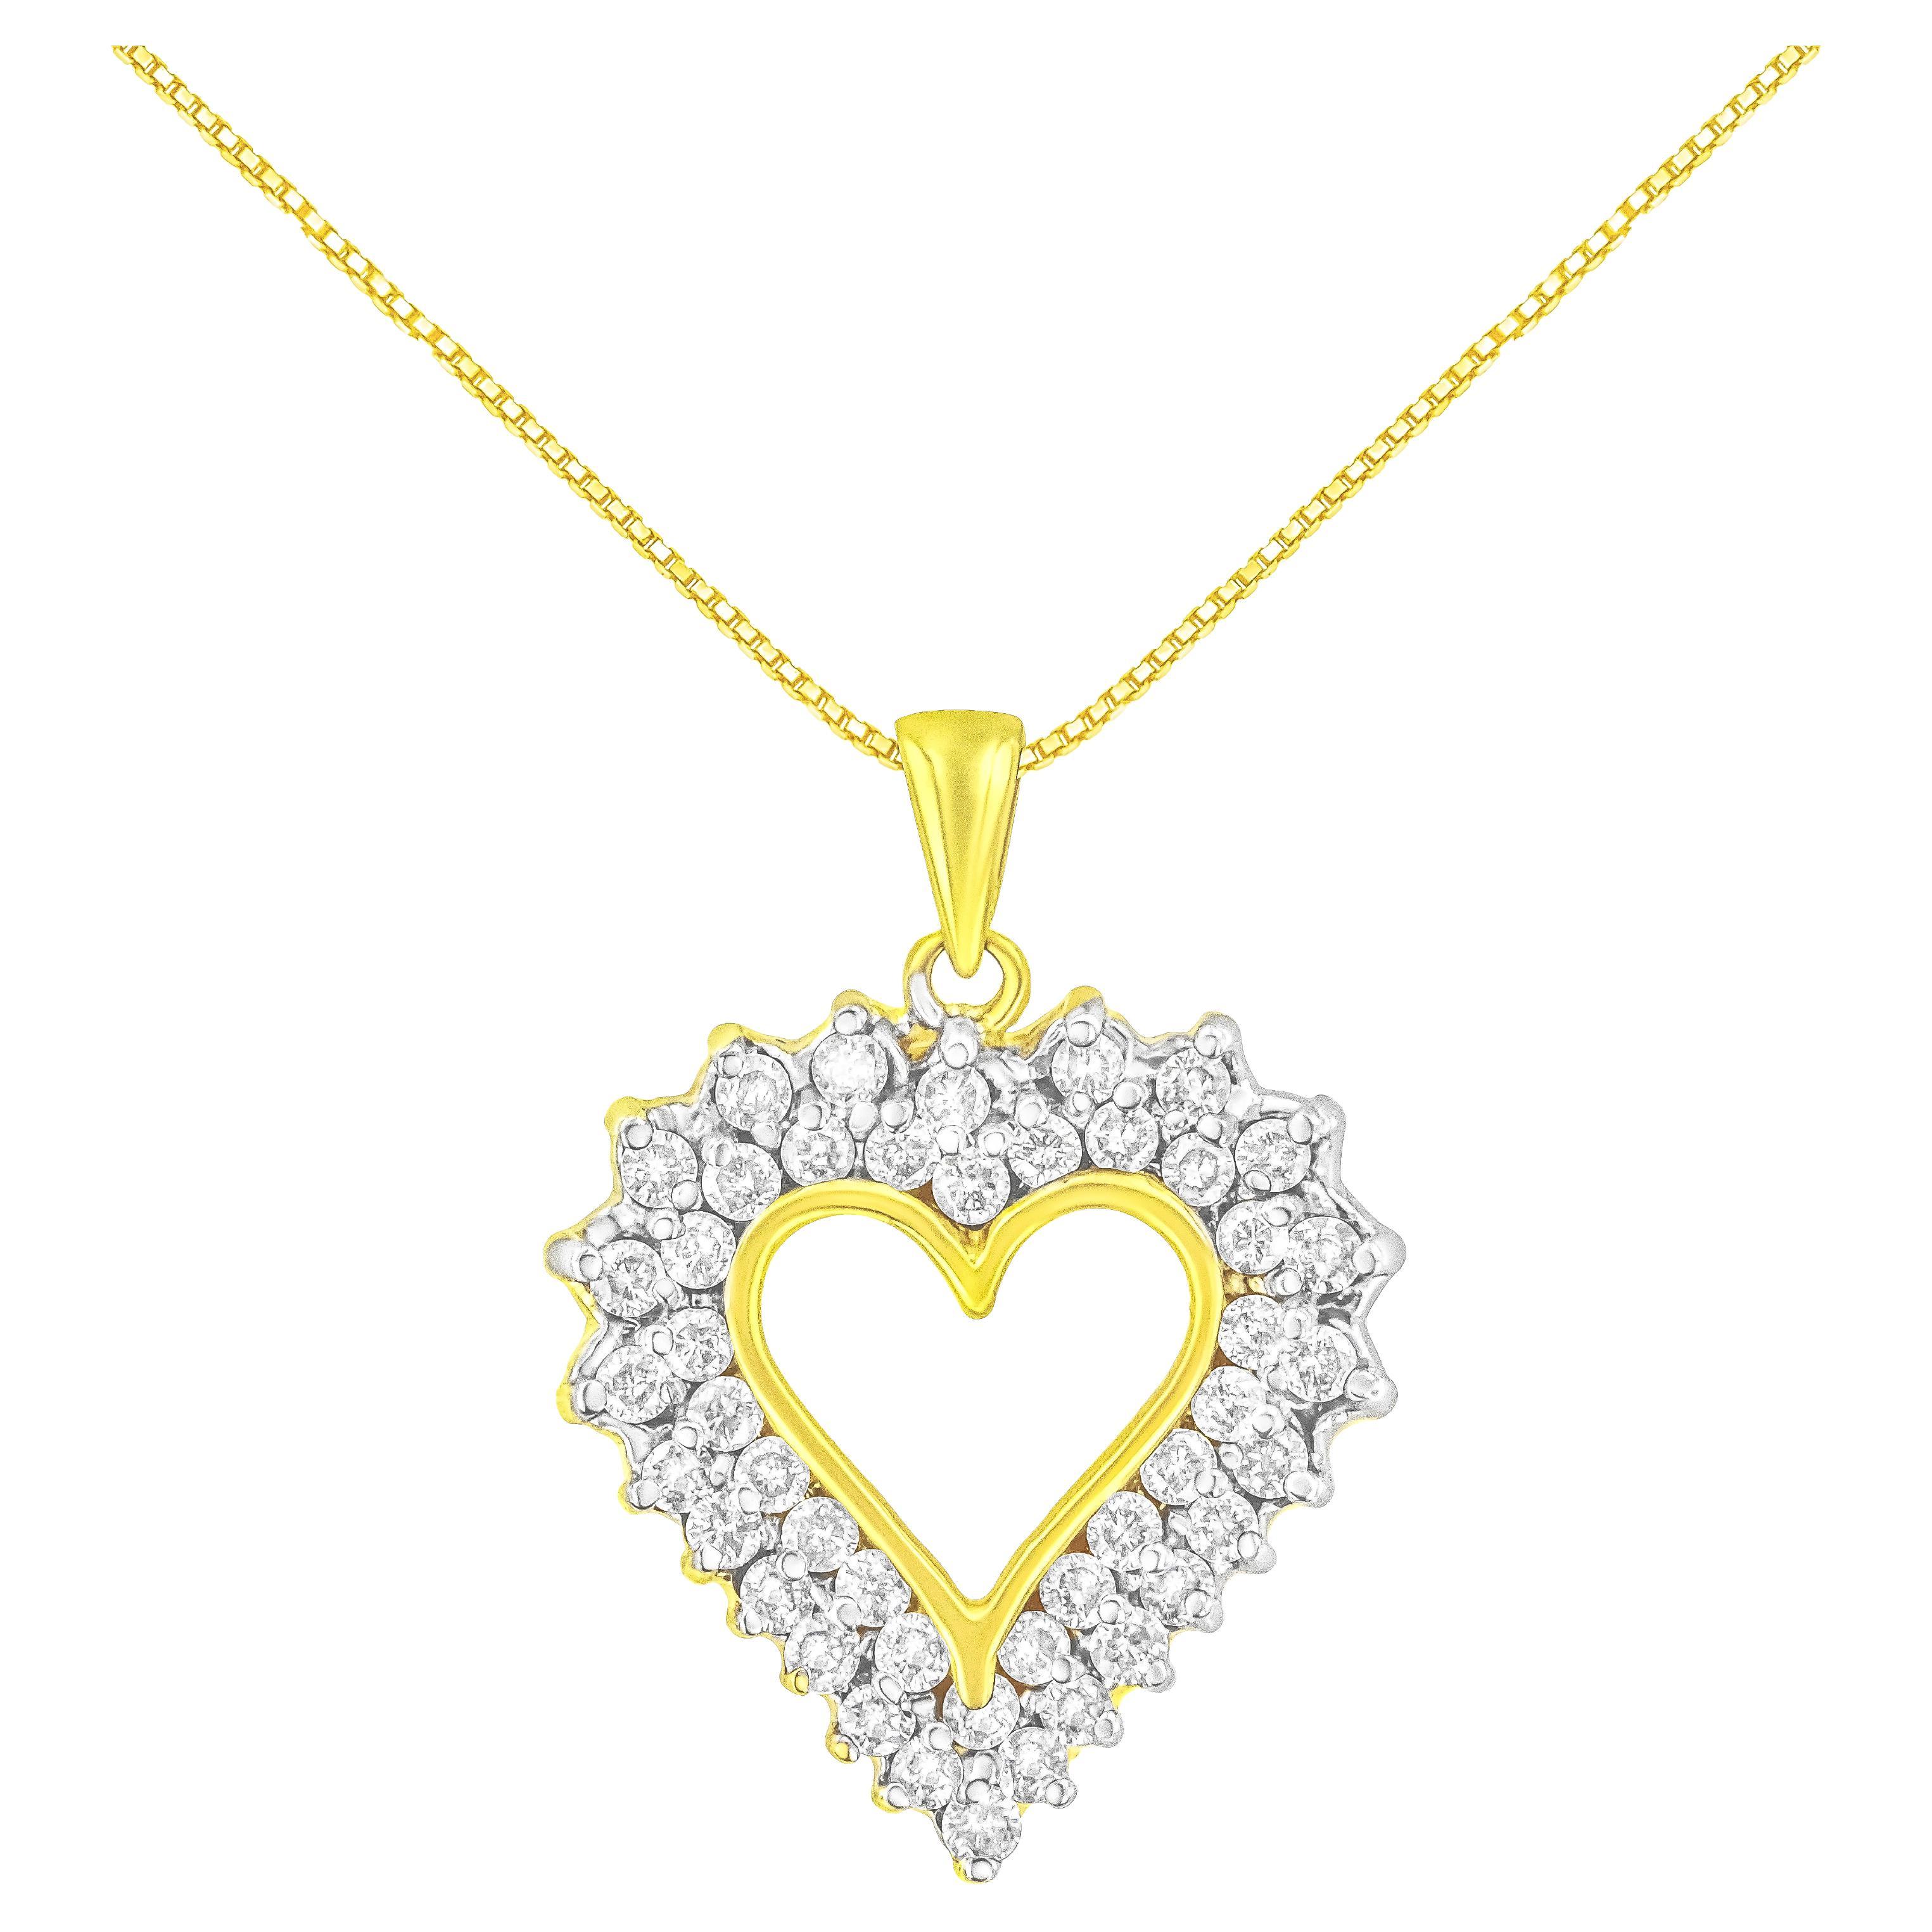 Yellow Gold Plated Sterling Silver 4.0 Carat Diamond Open Heart Pendant Necklace